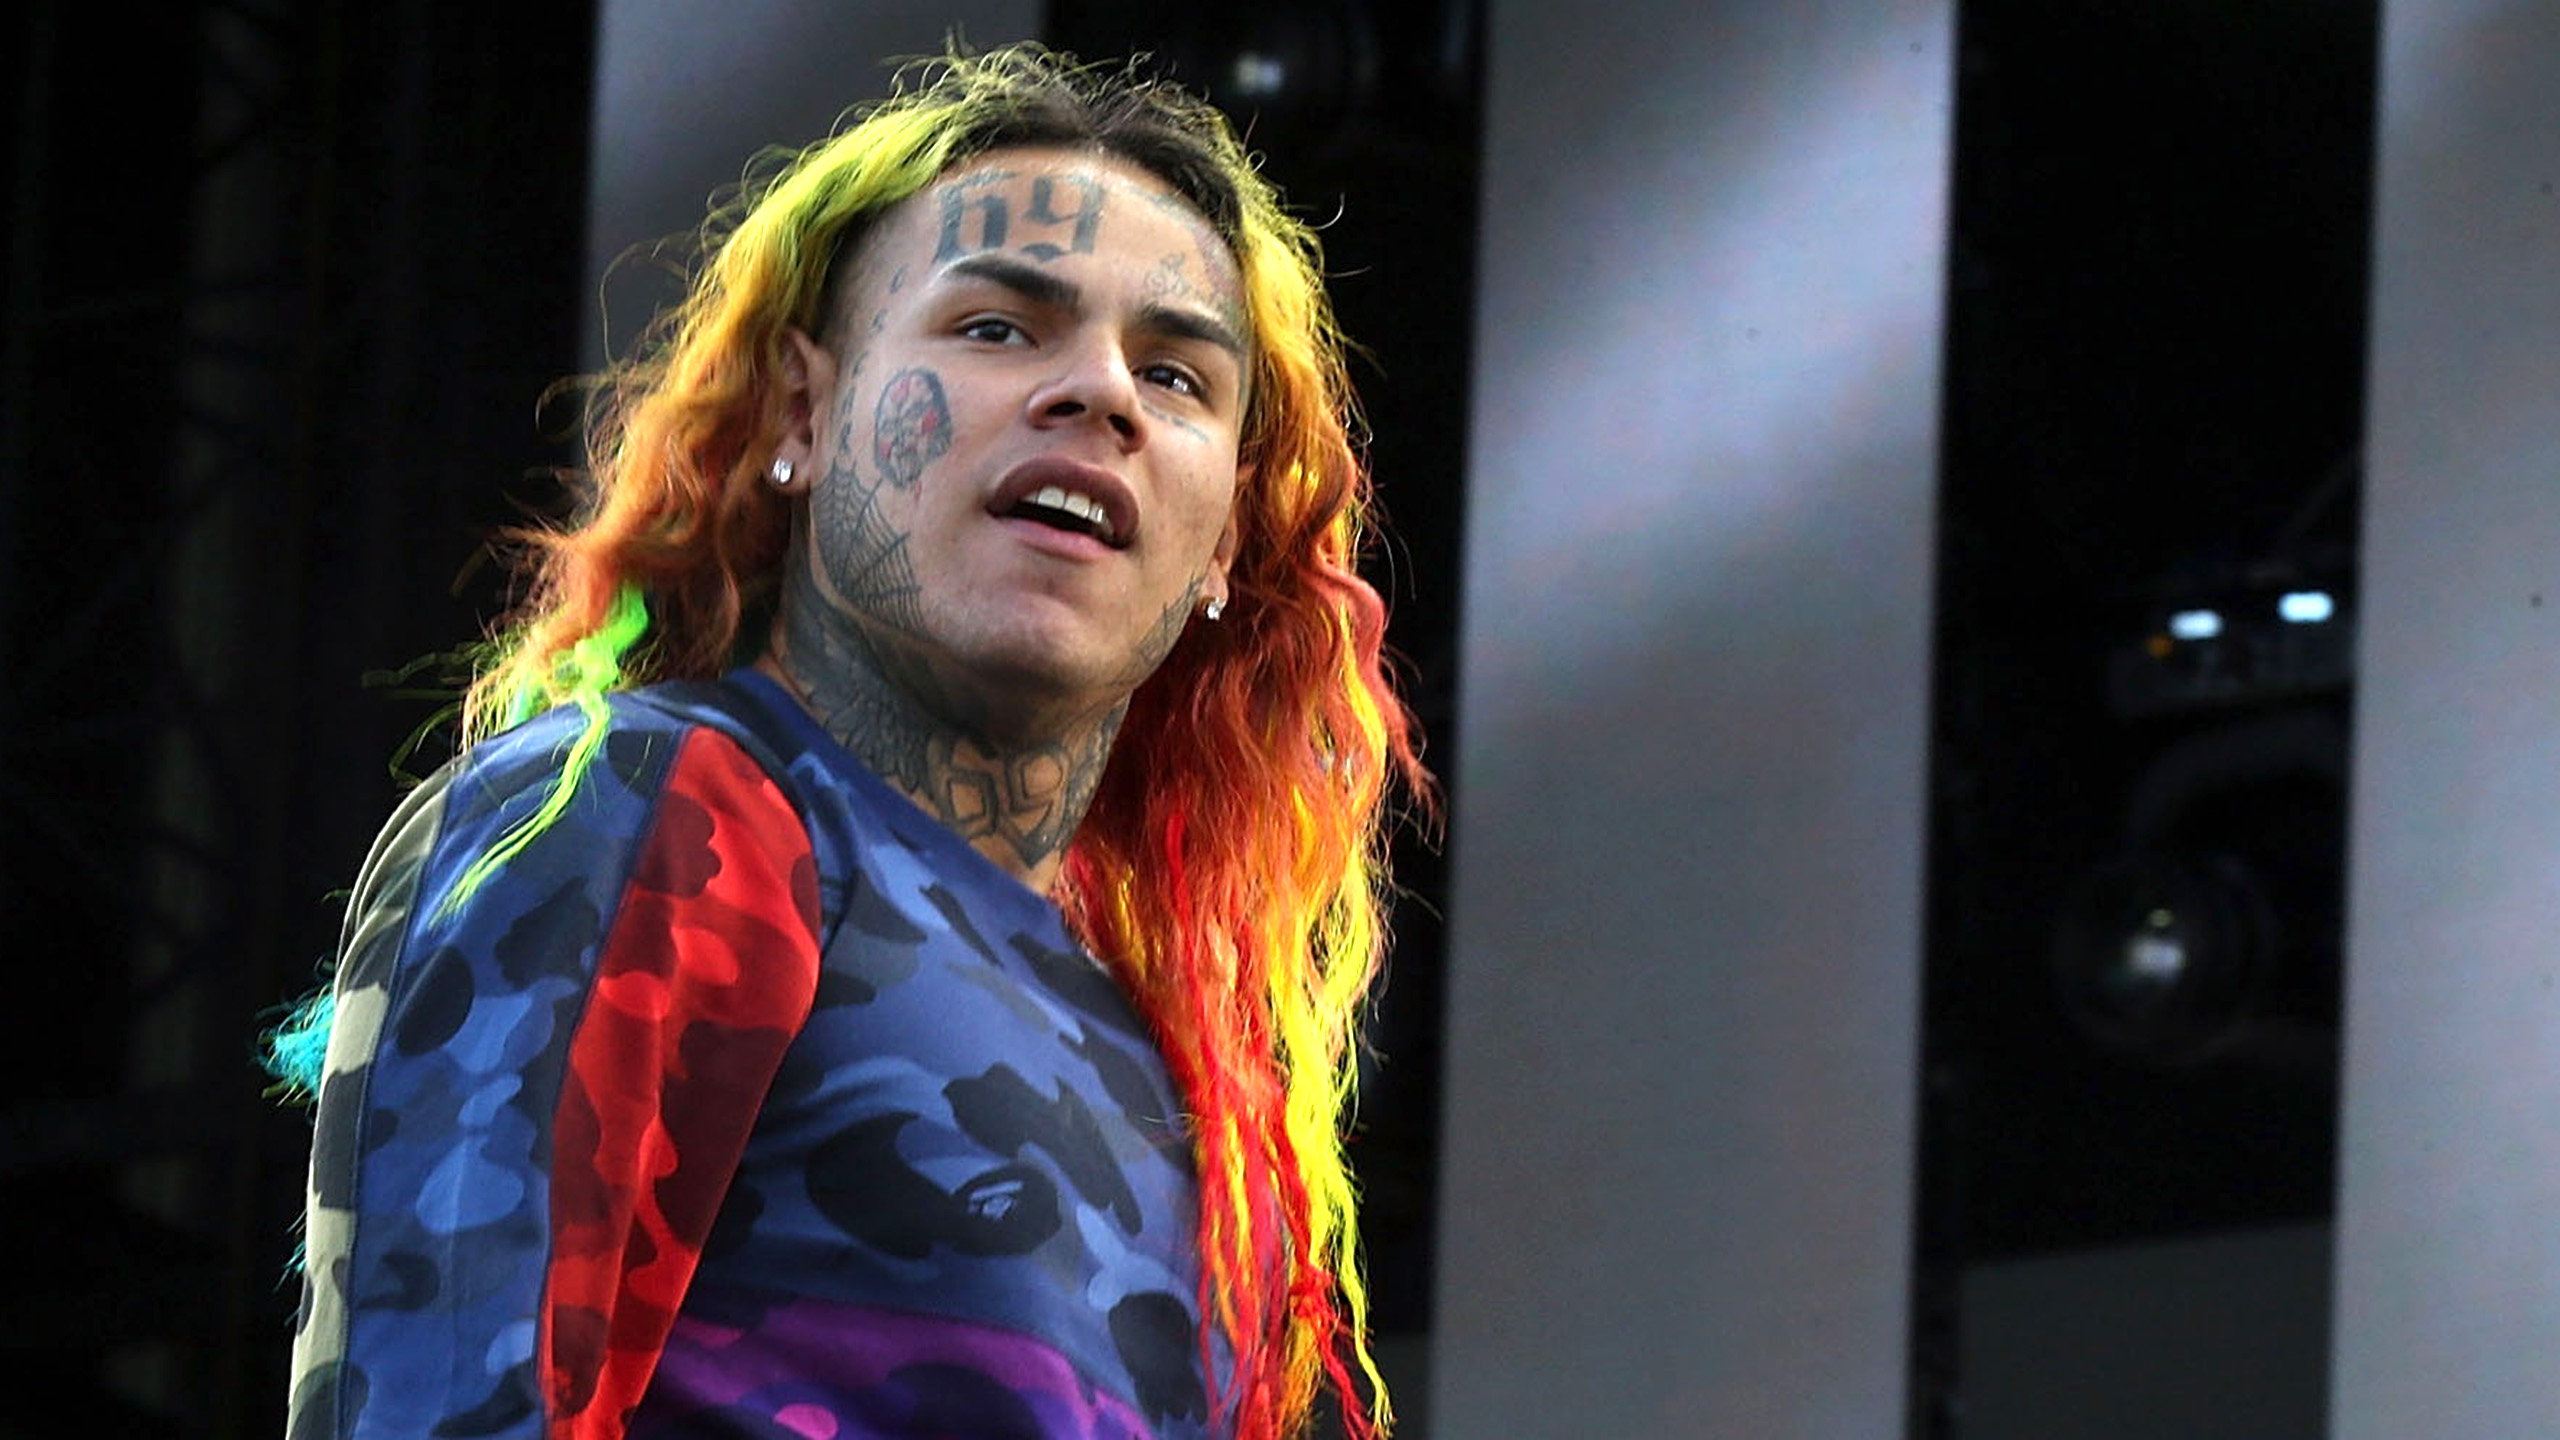 TEKASHI 6IX9INE’S FULL 47 PAGE TRANSCRIPT OF GUILTY PLEA AND EVIDENCE LEADING TO HIS ARREST.